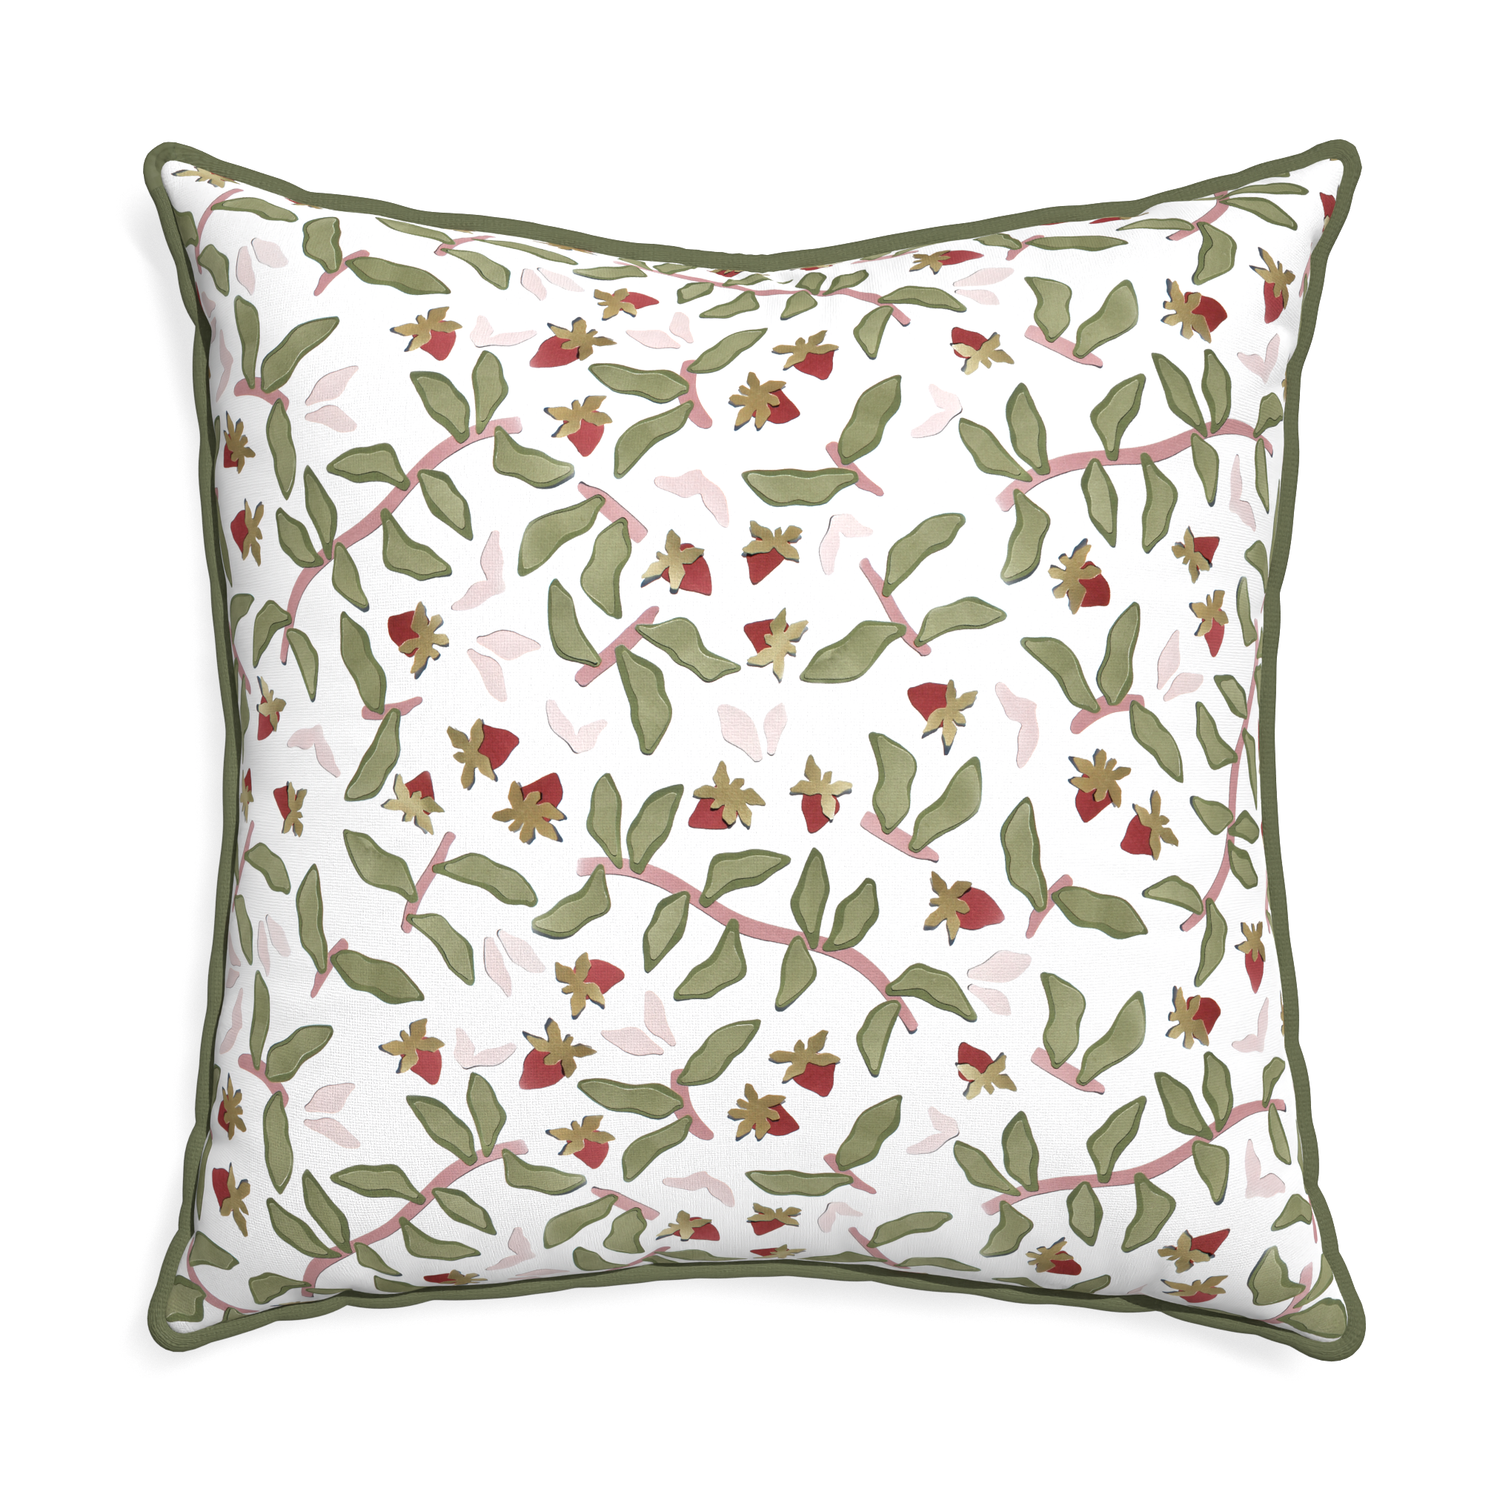 Euro-sham nellie custom pillow with f piping on white background